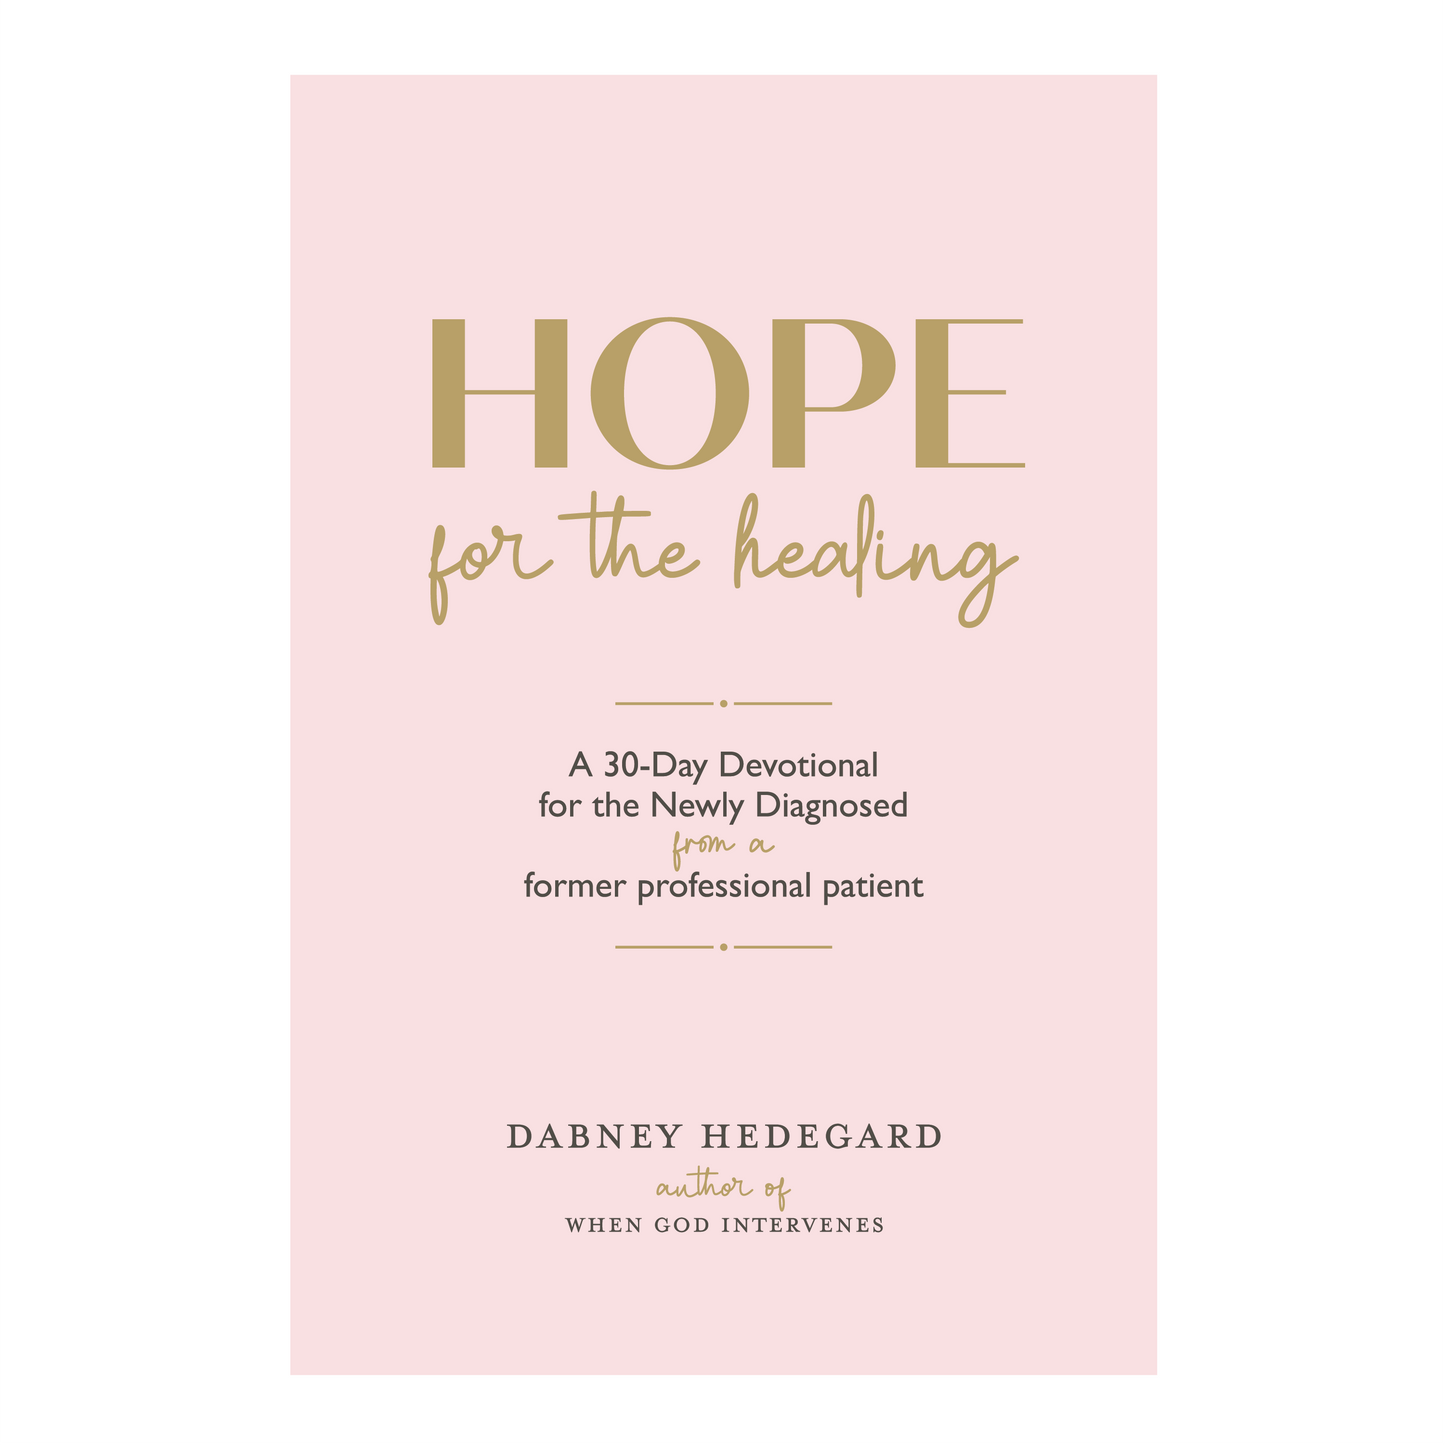 Hope for the Healing: A 30-Day Devotional for the Newly Diagnosed (paperback)